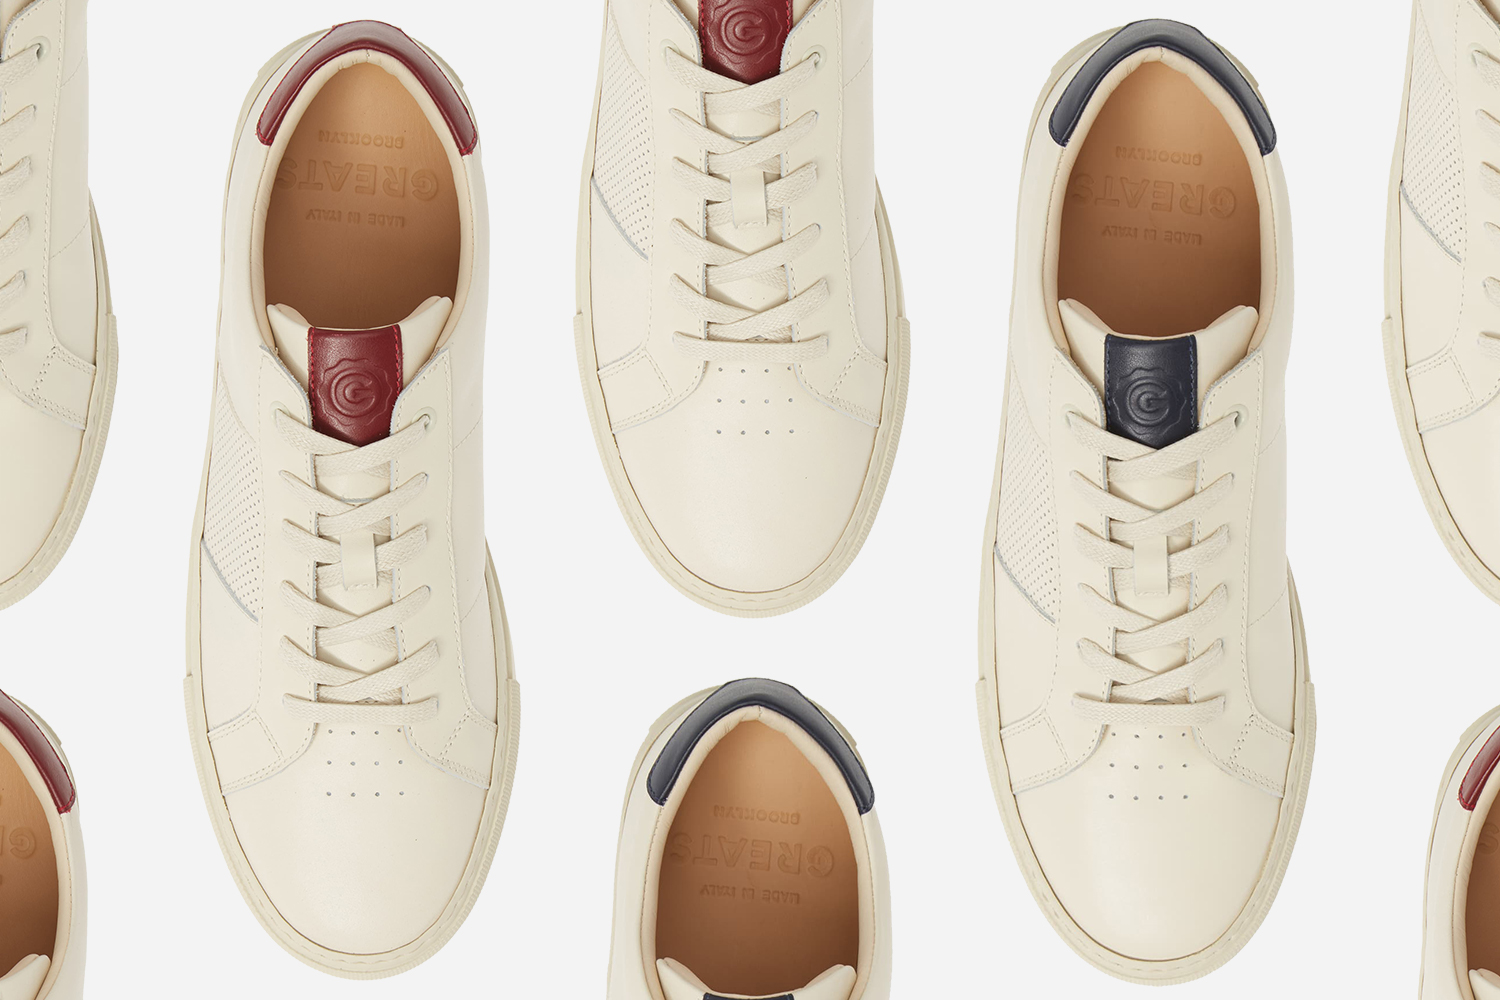 Greats' Italian Royale Sneakers Are 50 